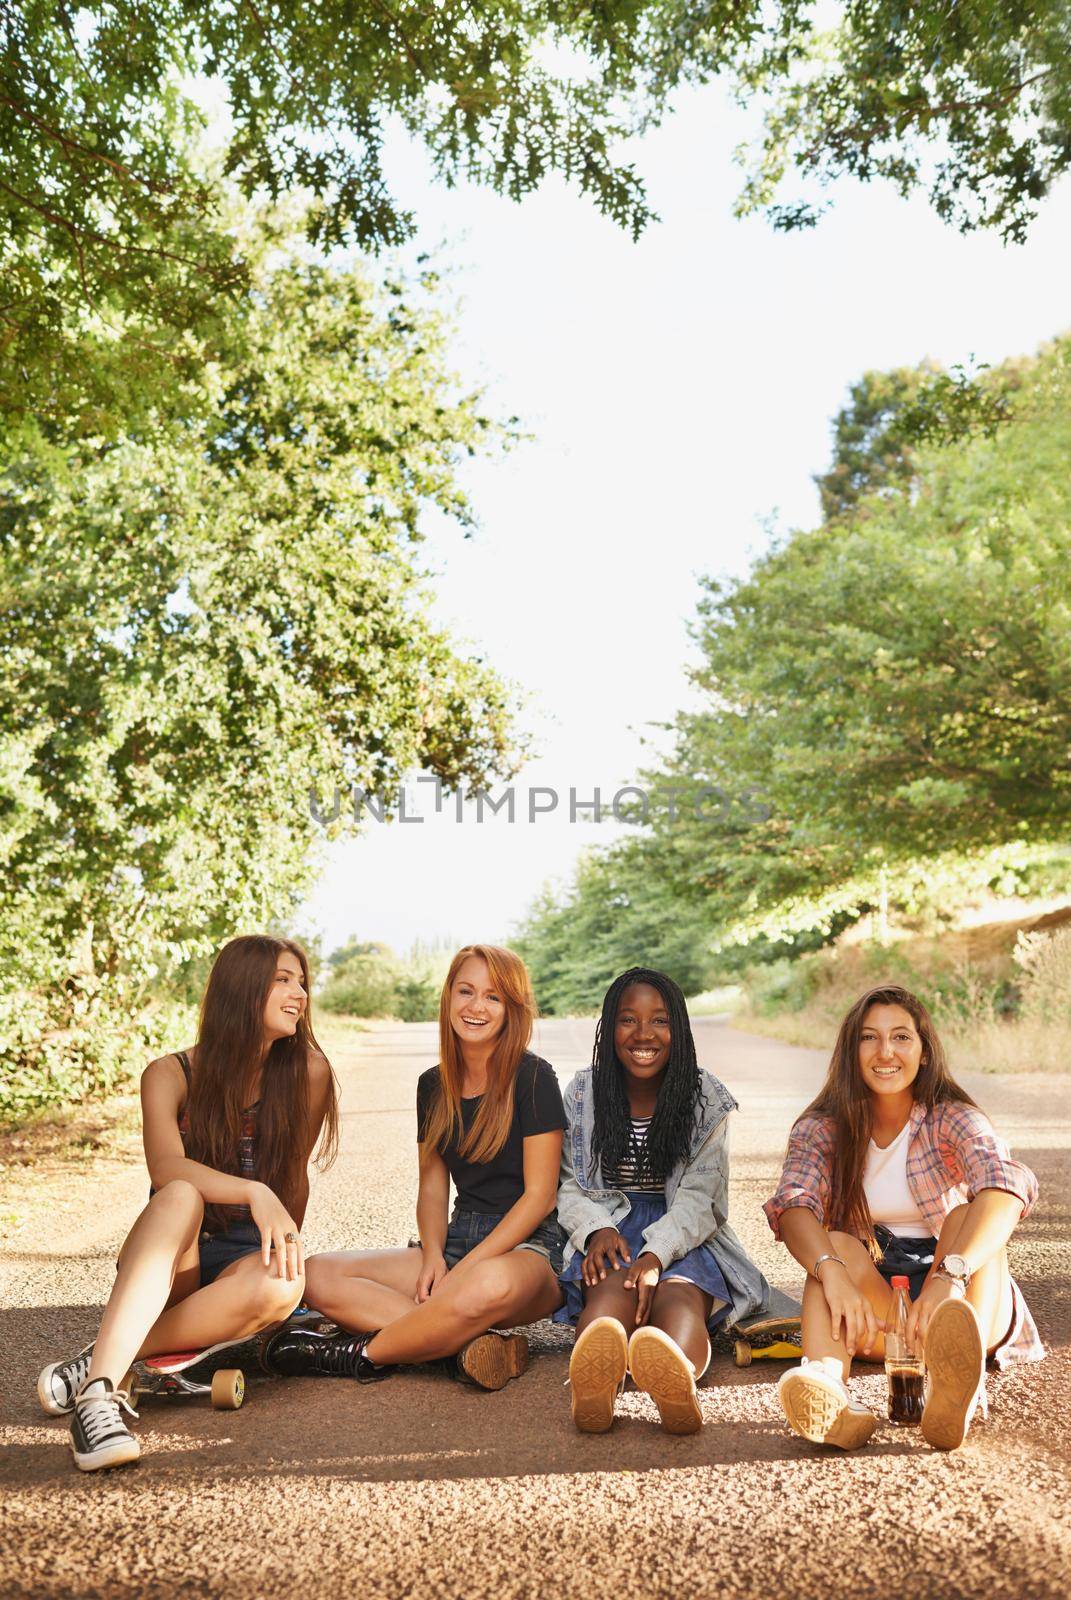 Laughter is an instant vacation. A group of multiracial teens sitting outdoors enjoying each others company. by YuriArcurs